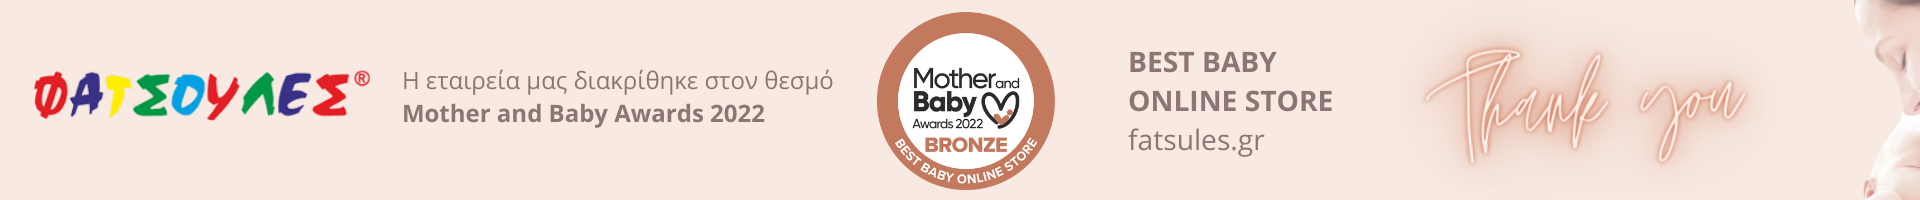 Mother & Baby awards 2022